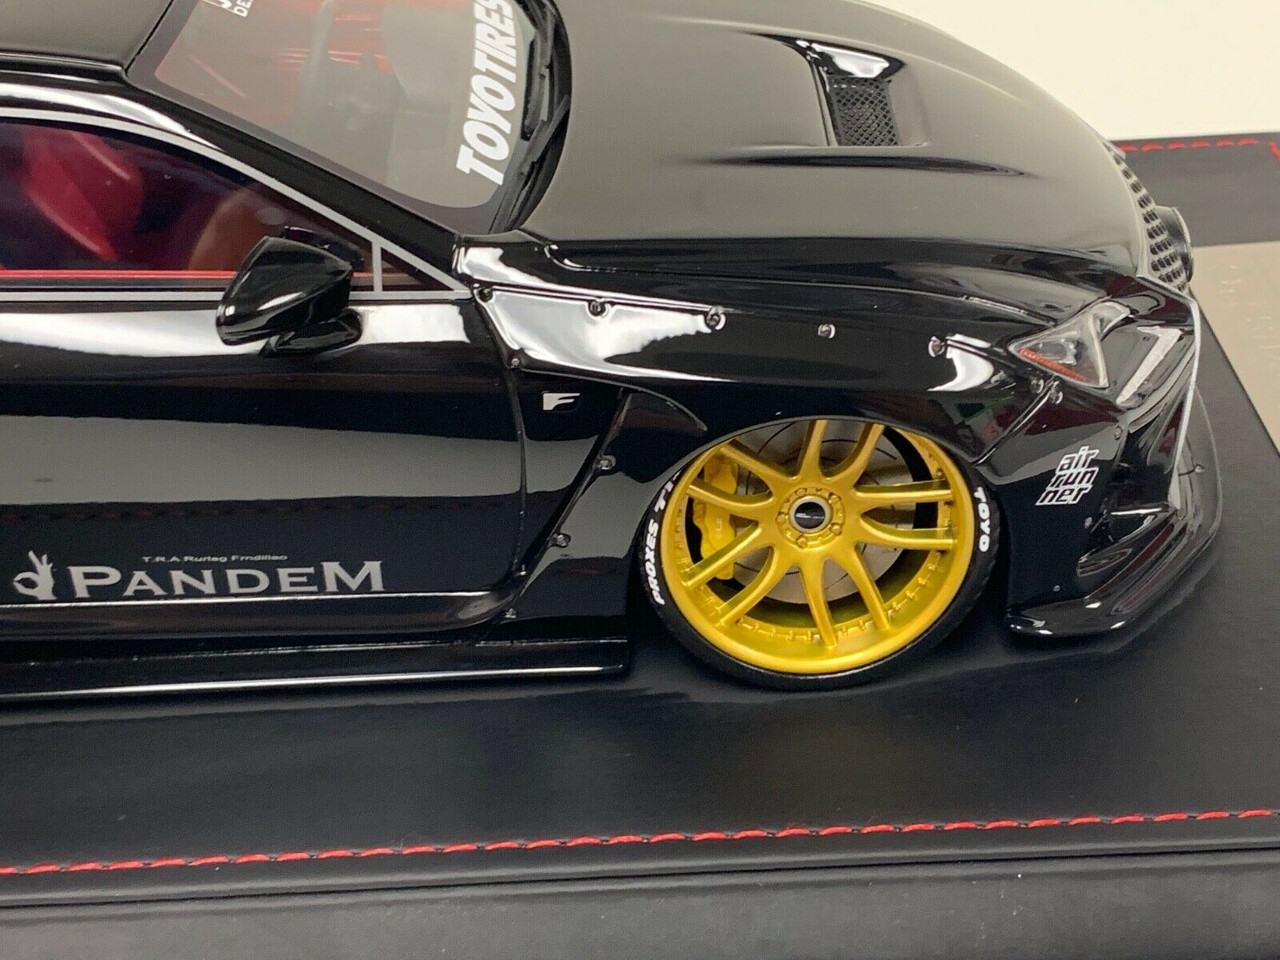 1/18 Dealer Edition Lexus RC F RCF Pandem Liberty Walk (Black with Gold Wheels) Resin Car Model Limited 100 Pieces